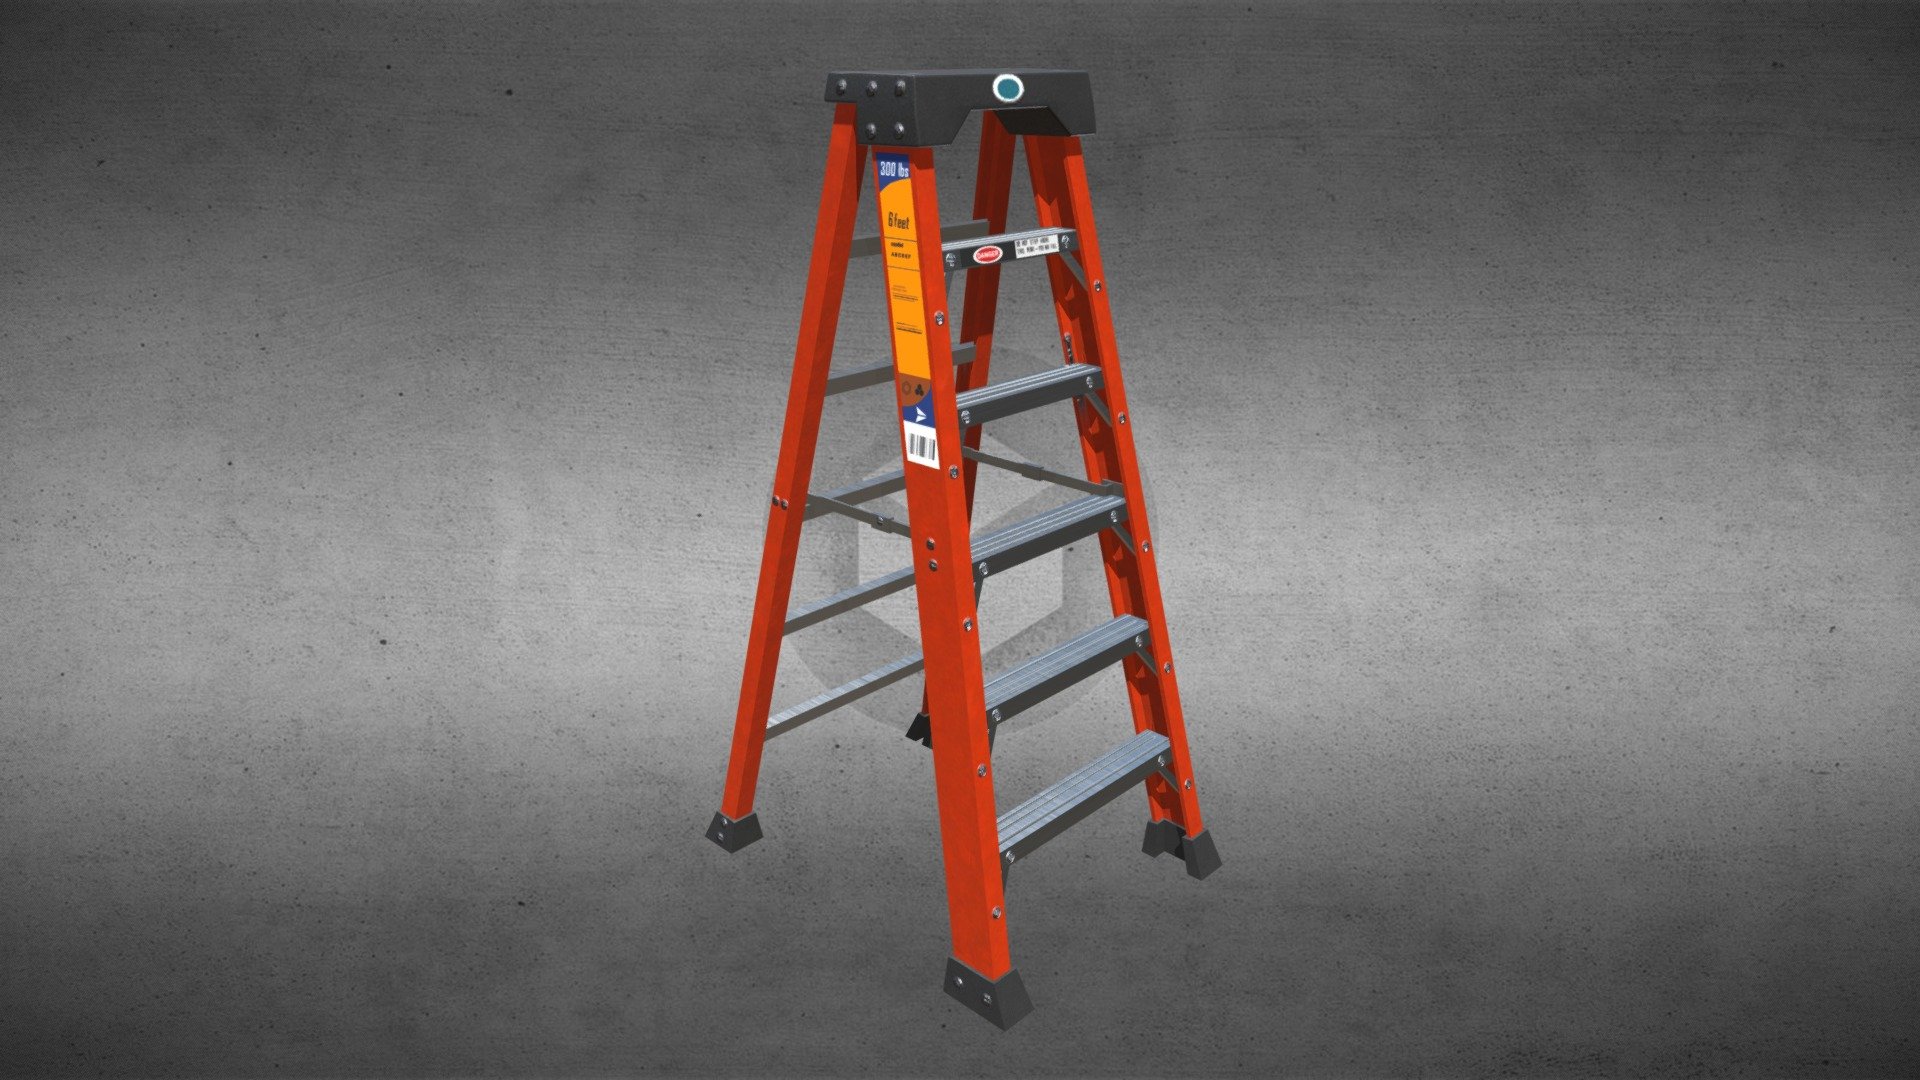 Link to open source step ladder files in Purdue University Research Repository (PURR): https://purr.purdue.edu/publications/3344/1

Link to open source “OSHA Fall Safety” project in Purdue University Research Repository (PURR): https://purr.purdue.edu/publications/3286/1 - Step Ladder - 3D model by Purdue Envision Center (@EnvisionCenter) 3d model